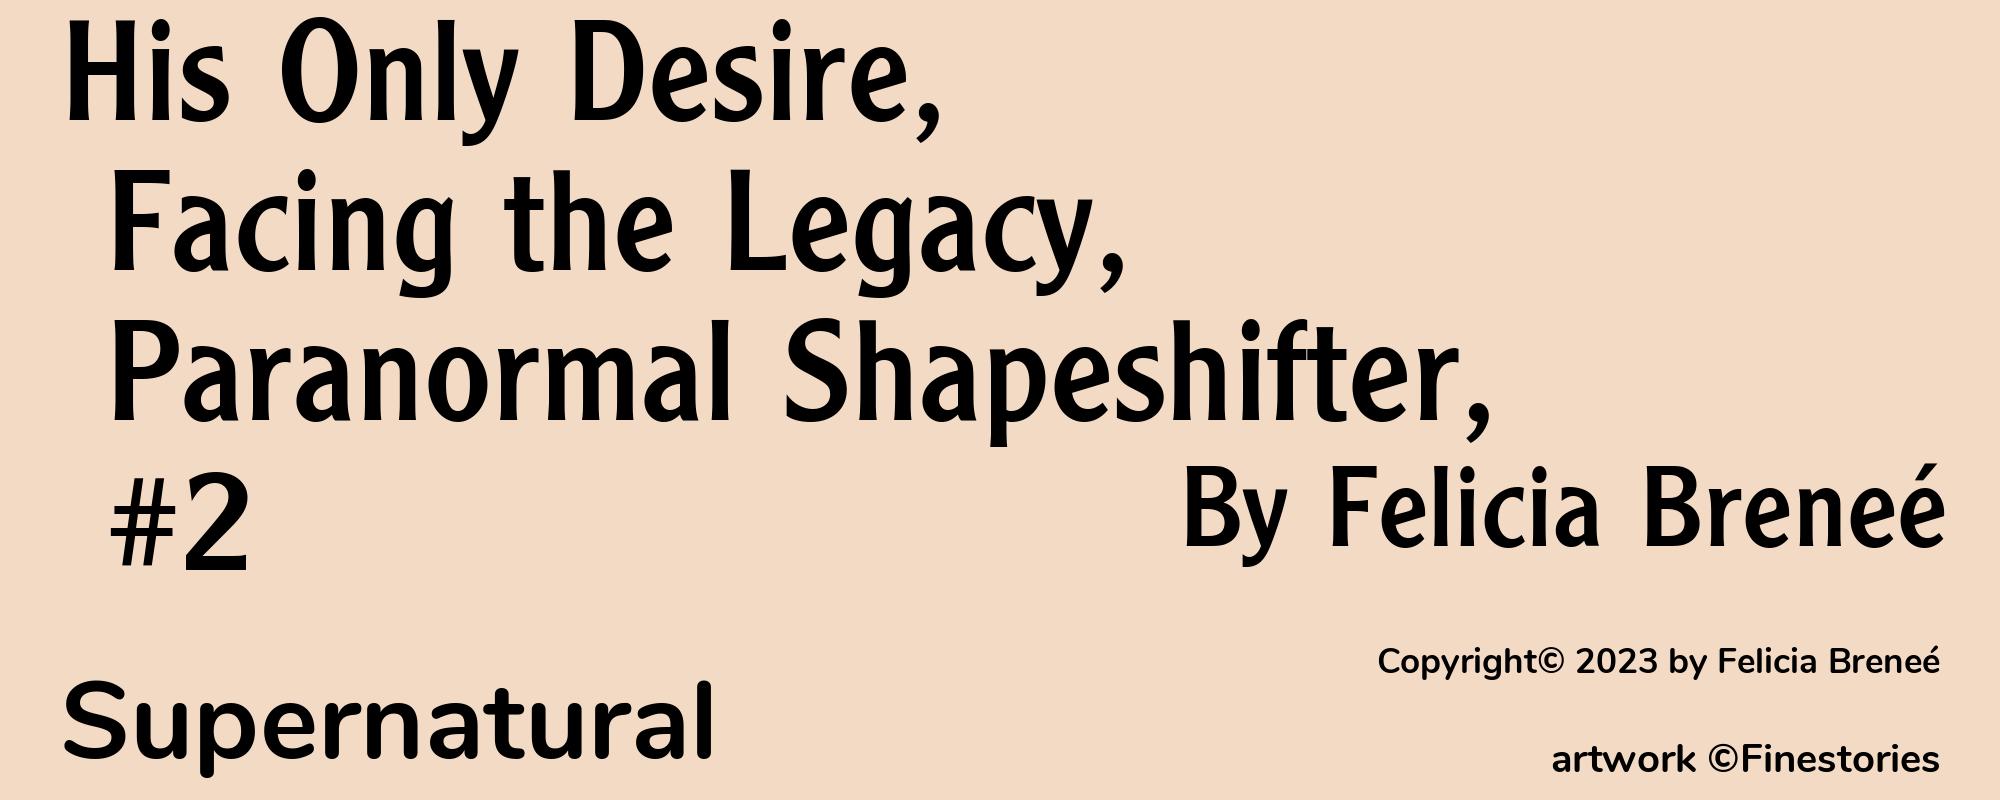 His Only Desire, Facing the Legacy, Paranormal Shapeshifter, #2 - Cover